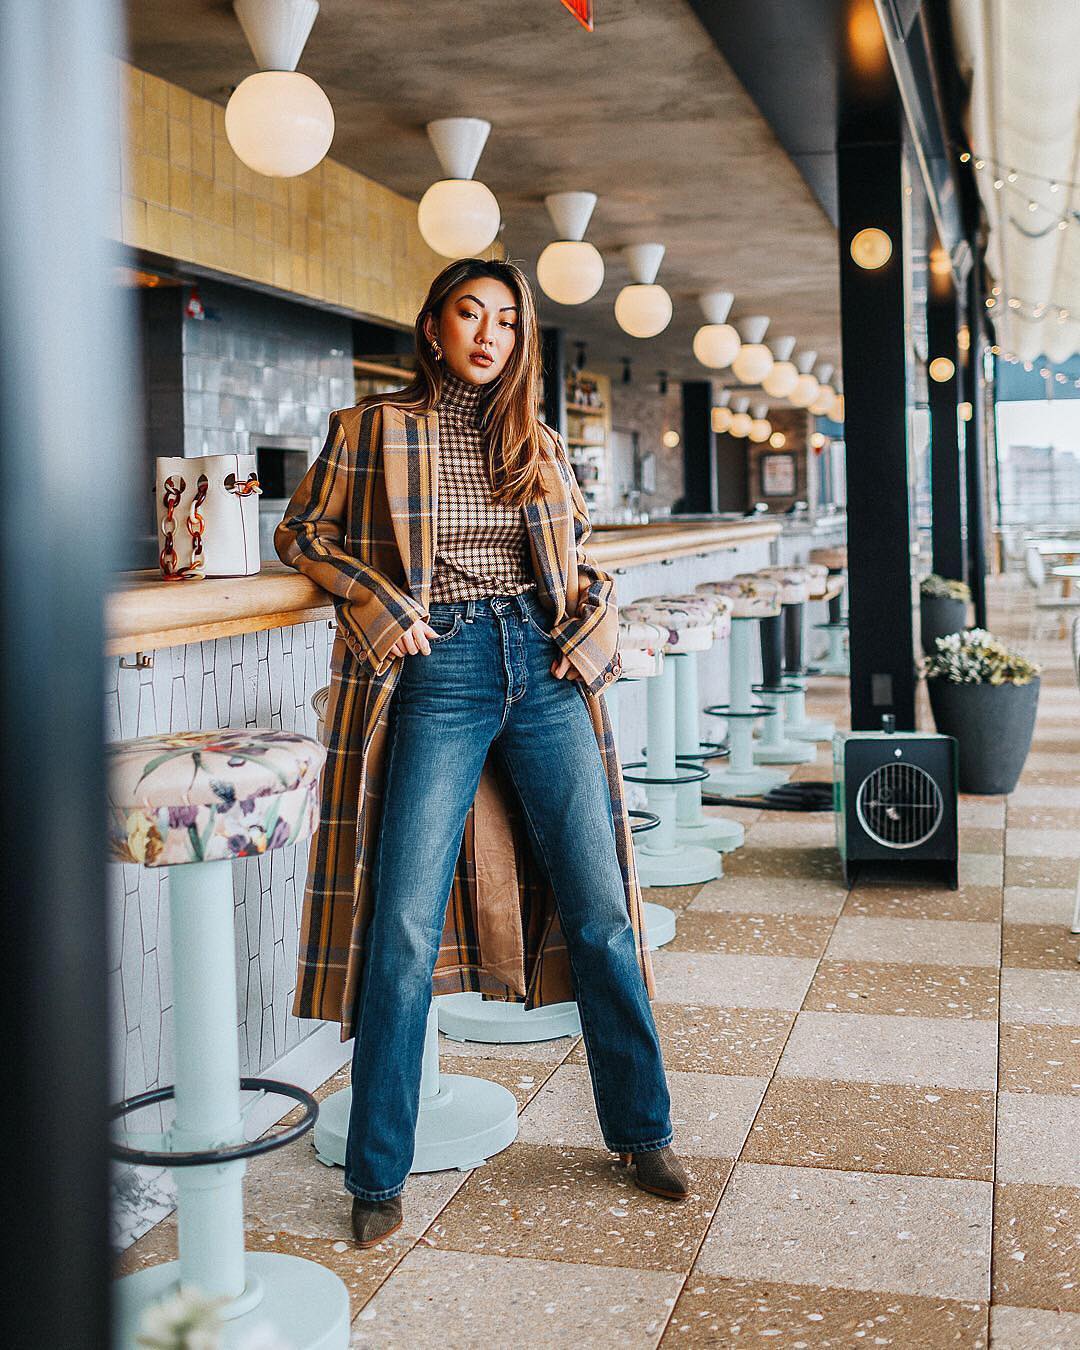 Long Plaid Coat With Plaid Turtleneck And
Regular Jeans Outfit